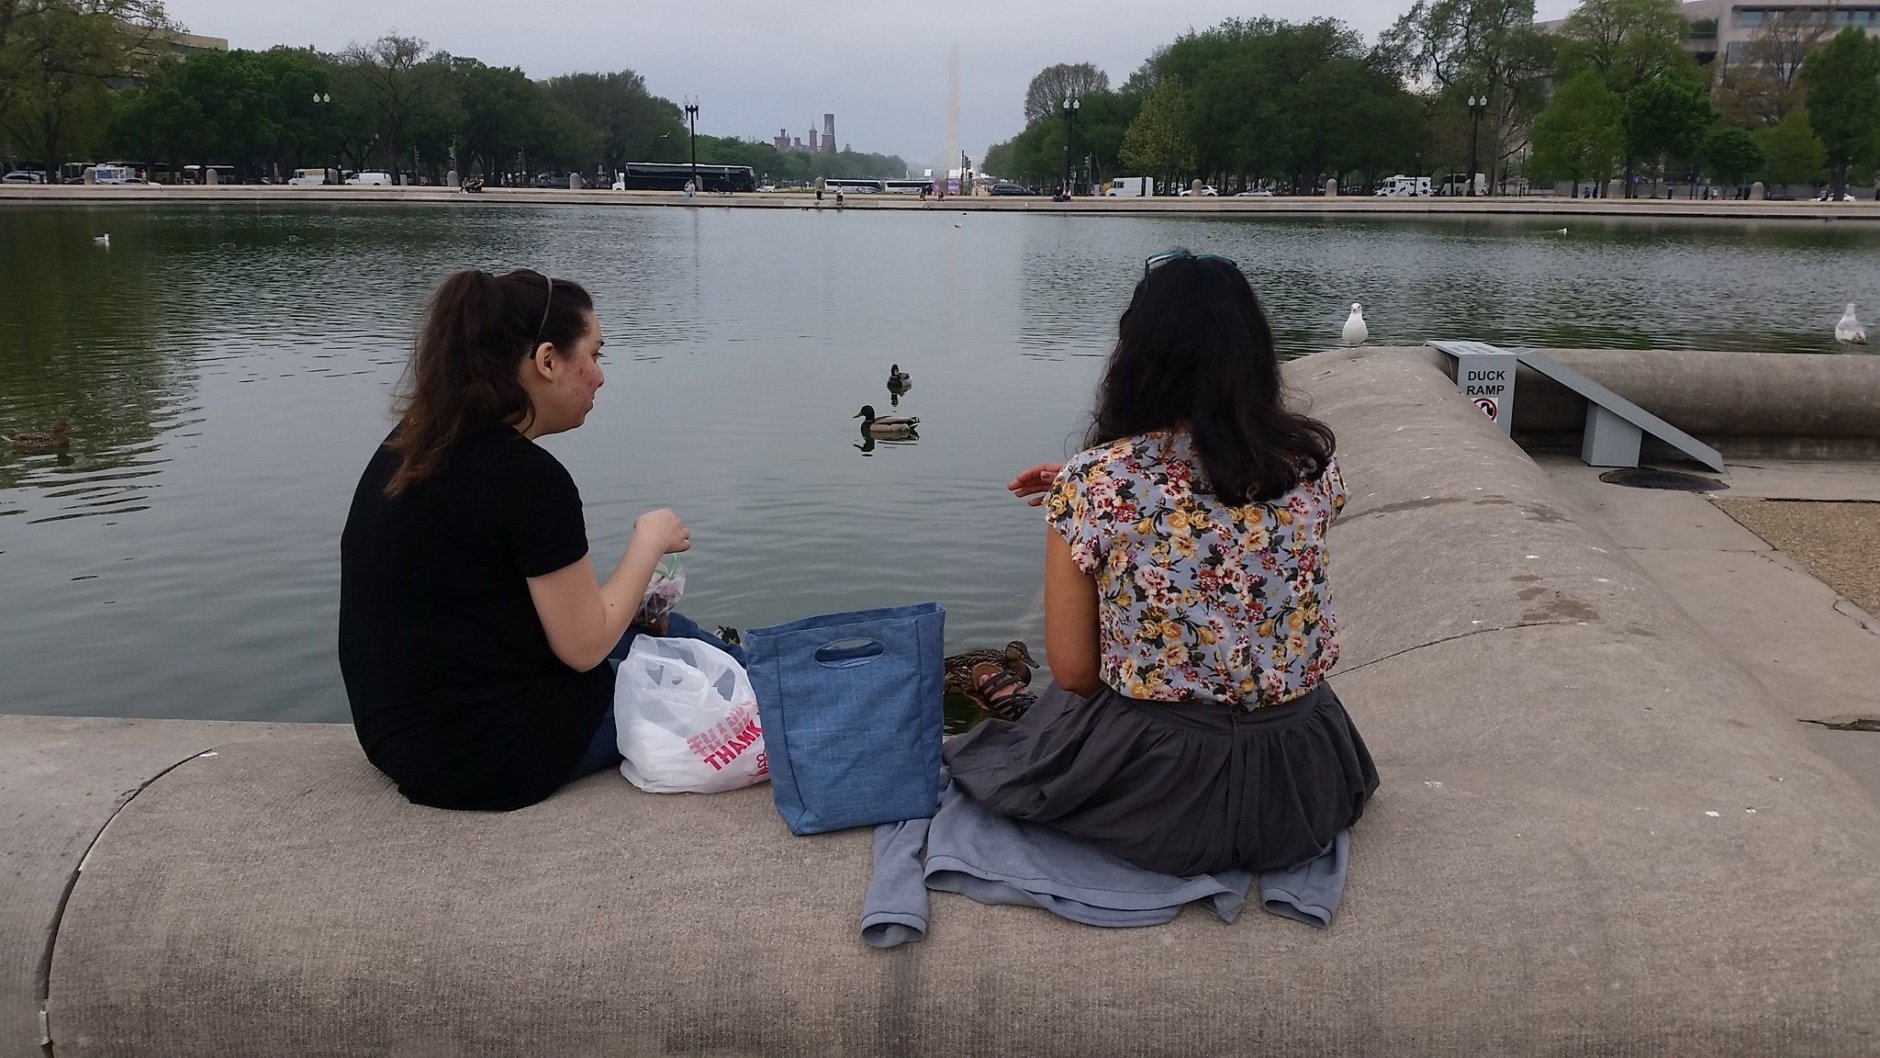 Linton said tourists take more pictures of the ducks than of the Capitol. (WTOP/Kathy Stewart)